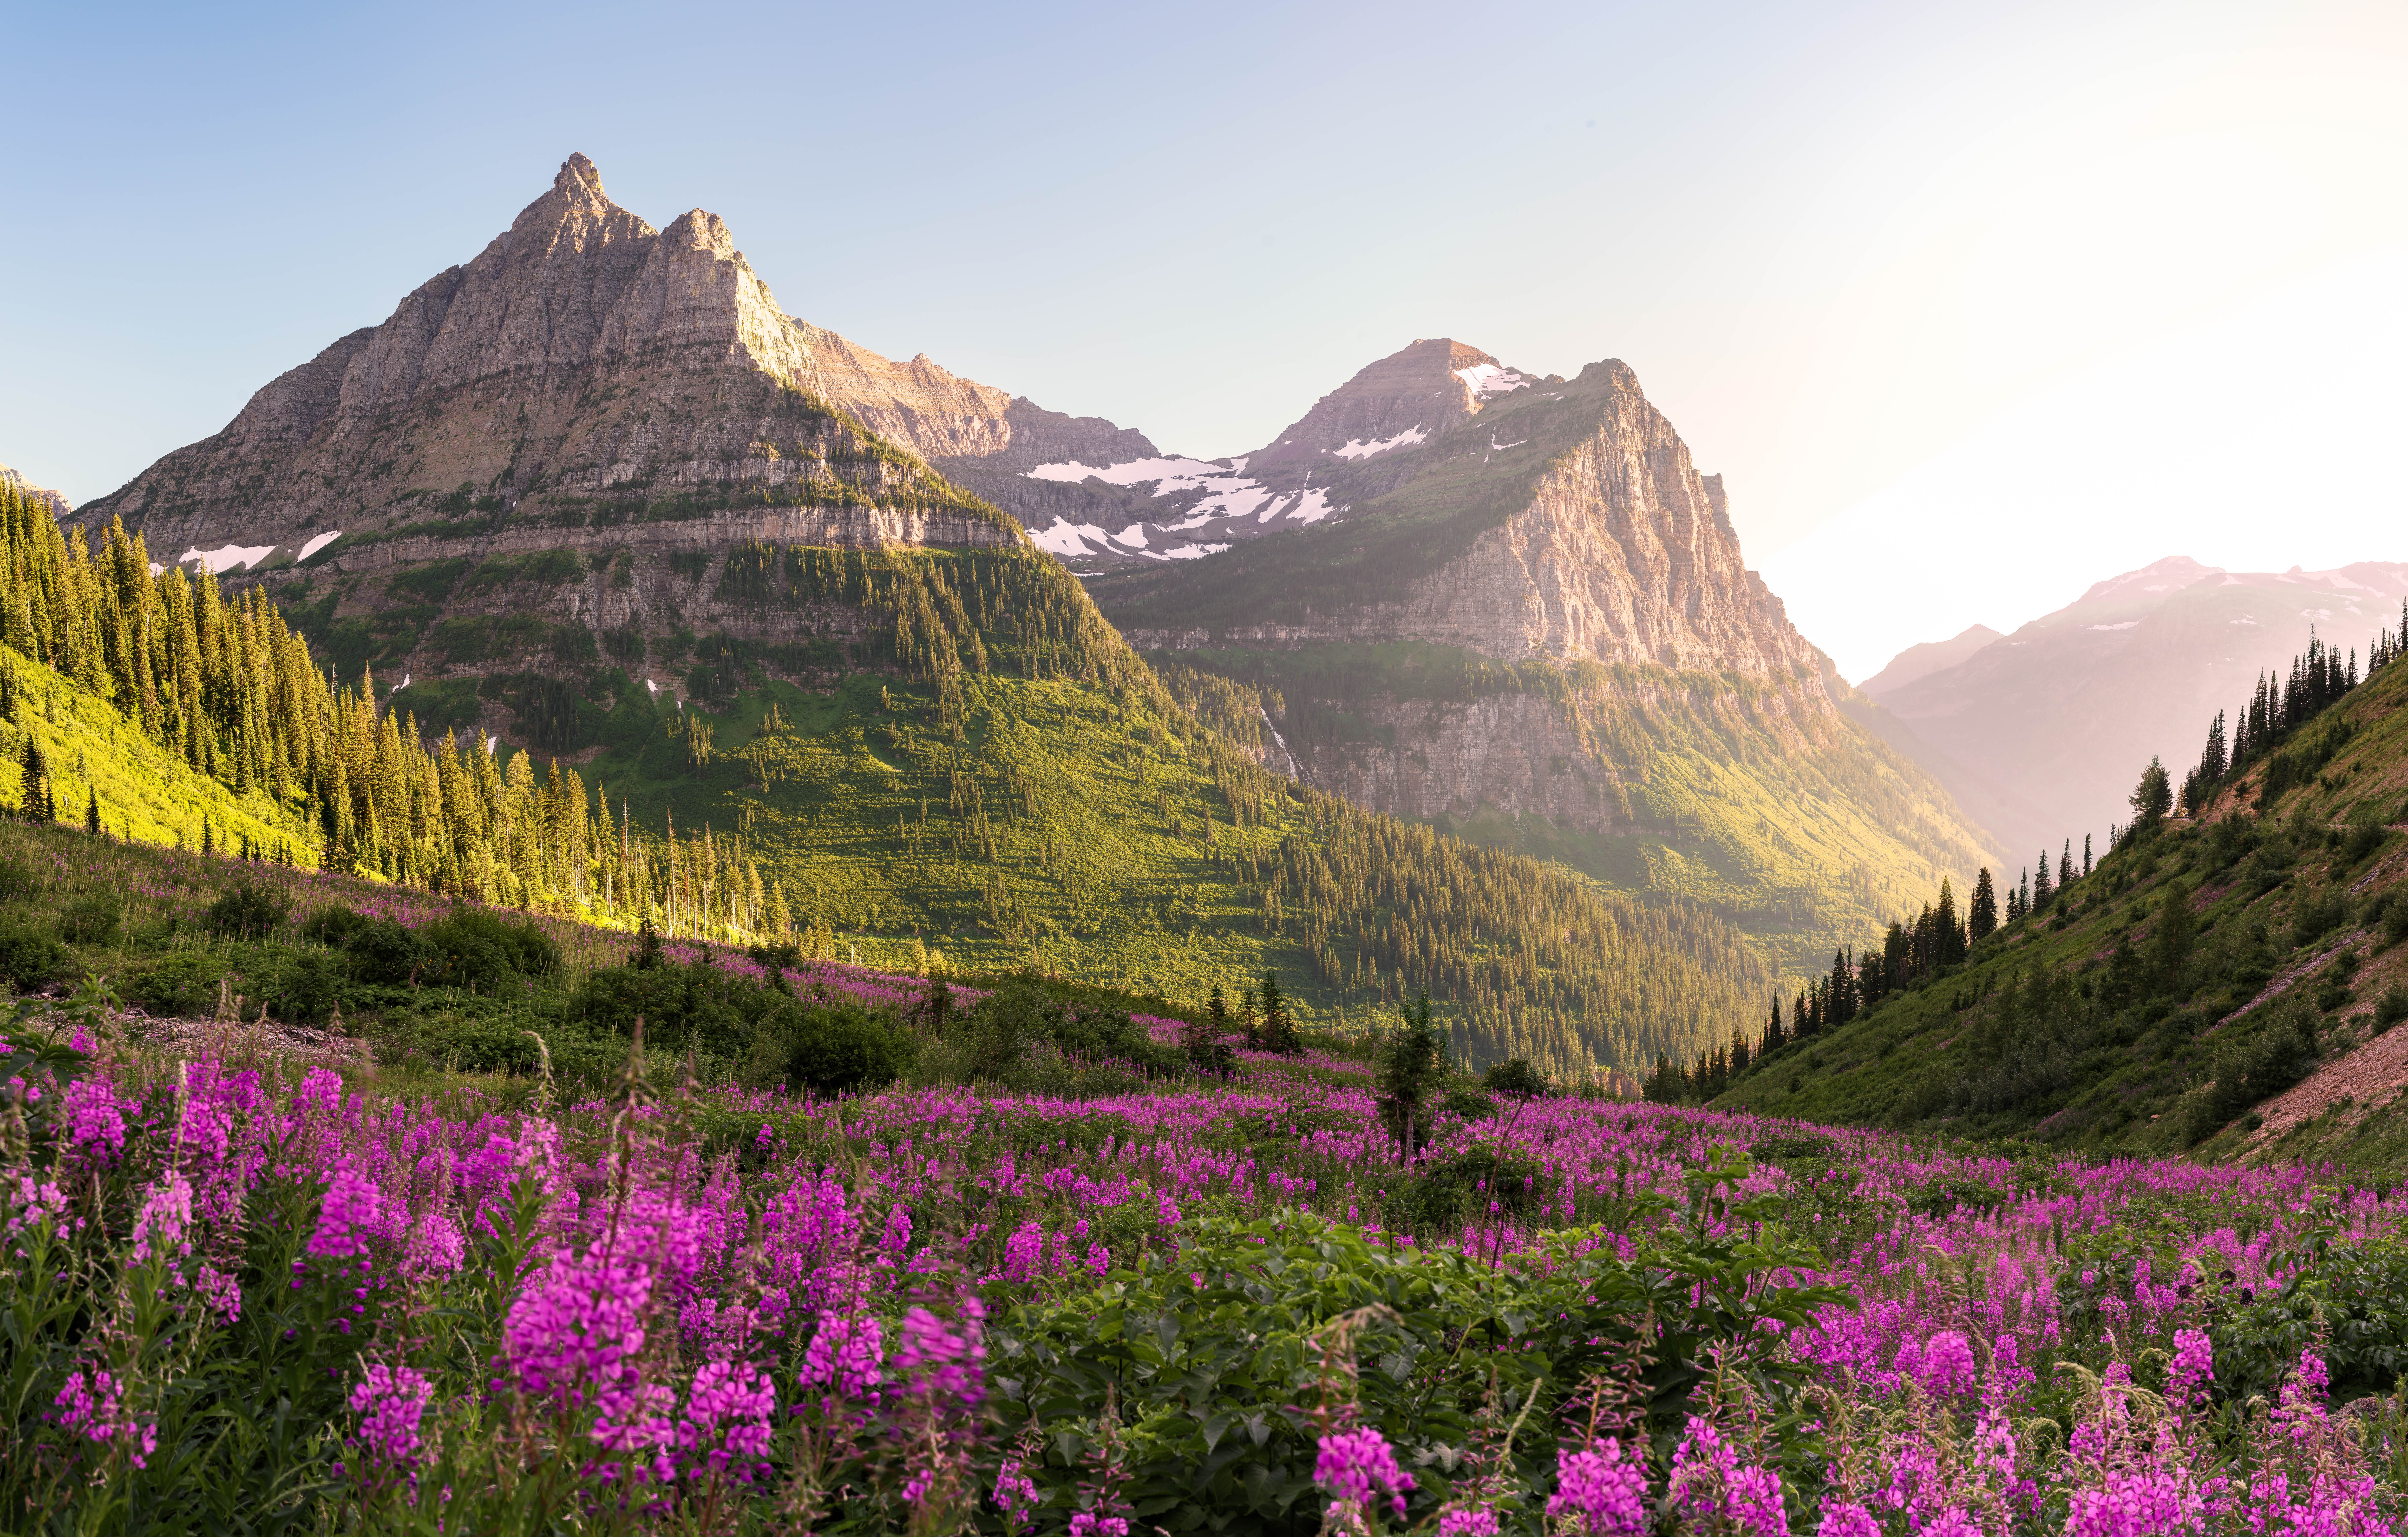 Mountains with a meadow of purple flowers in the foreground